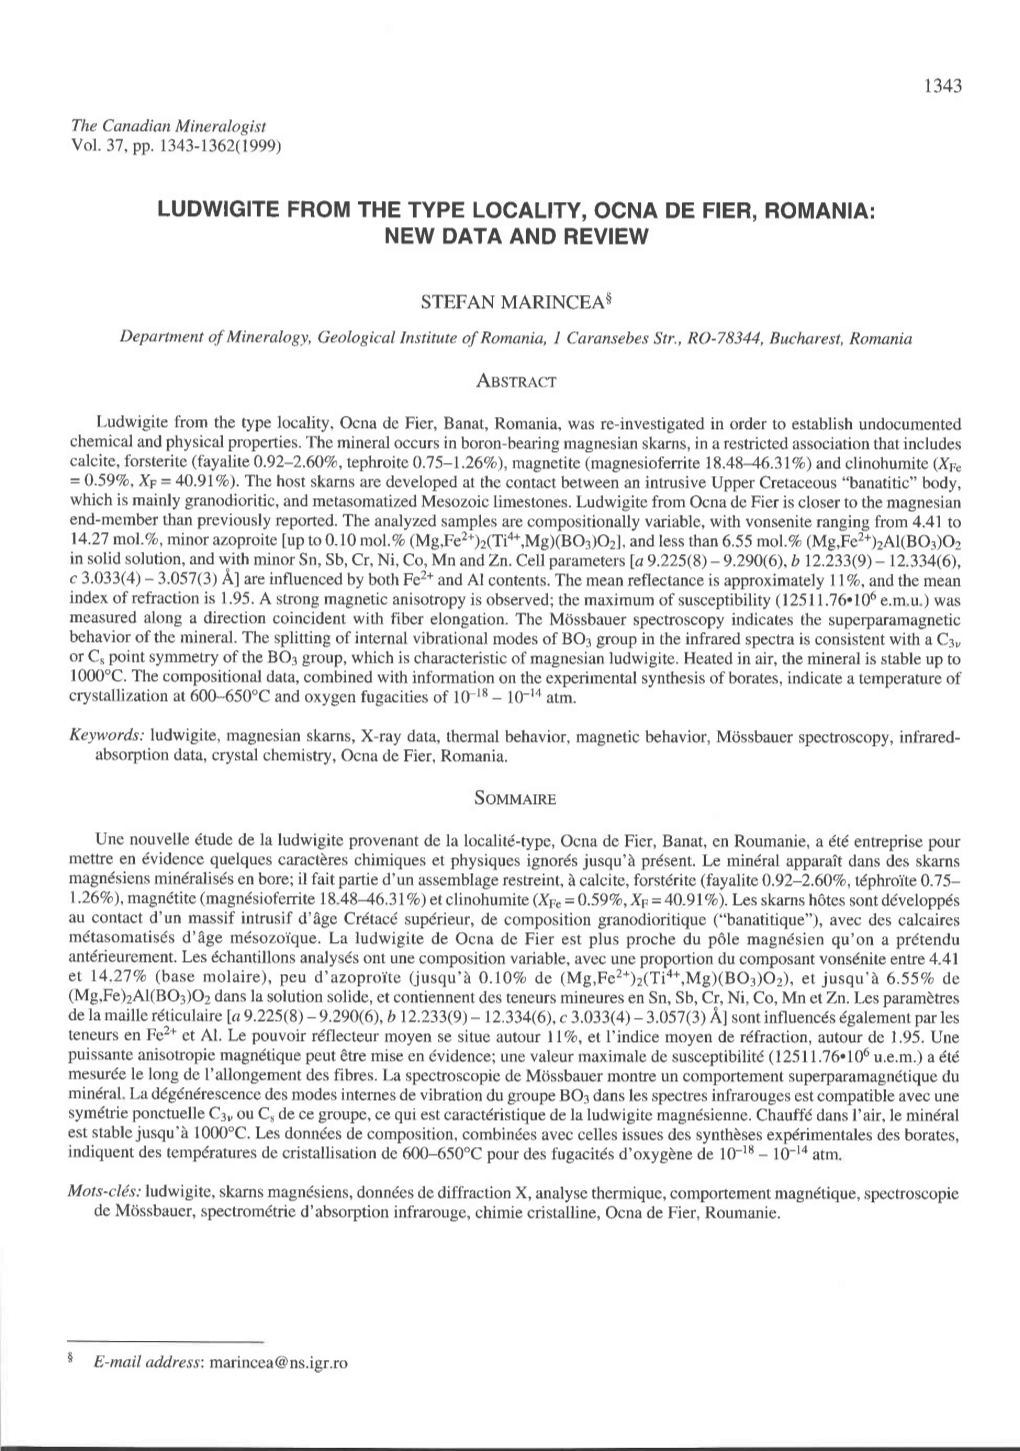 Ludwigite from the Type Locality, Ocna De Fier, Banat, Romania, Was Re-Investigated in Order to Establish Undocumented Chemical and Physical Properties